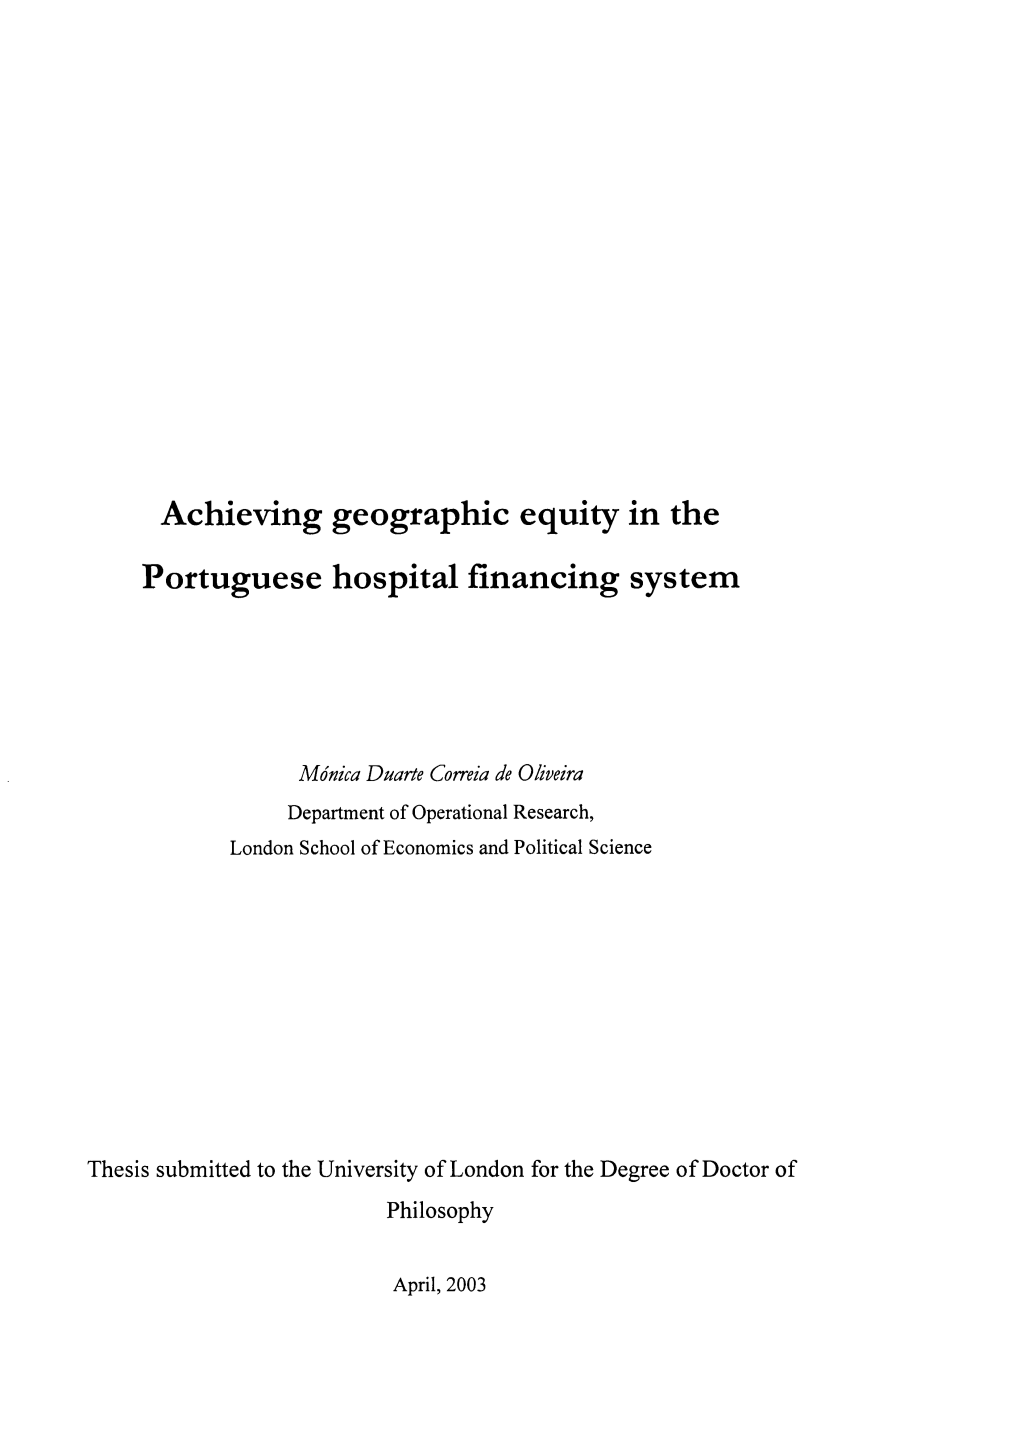 Achieving Geographic Equity in the Portuguese Hospital Financing System